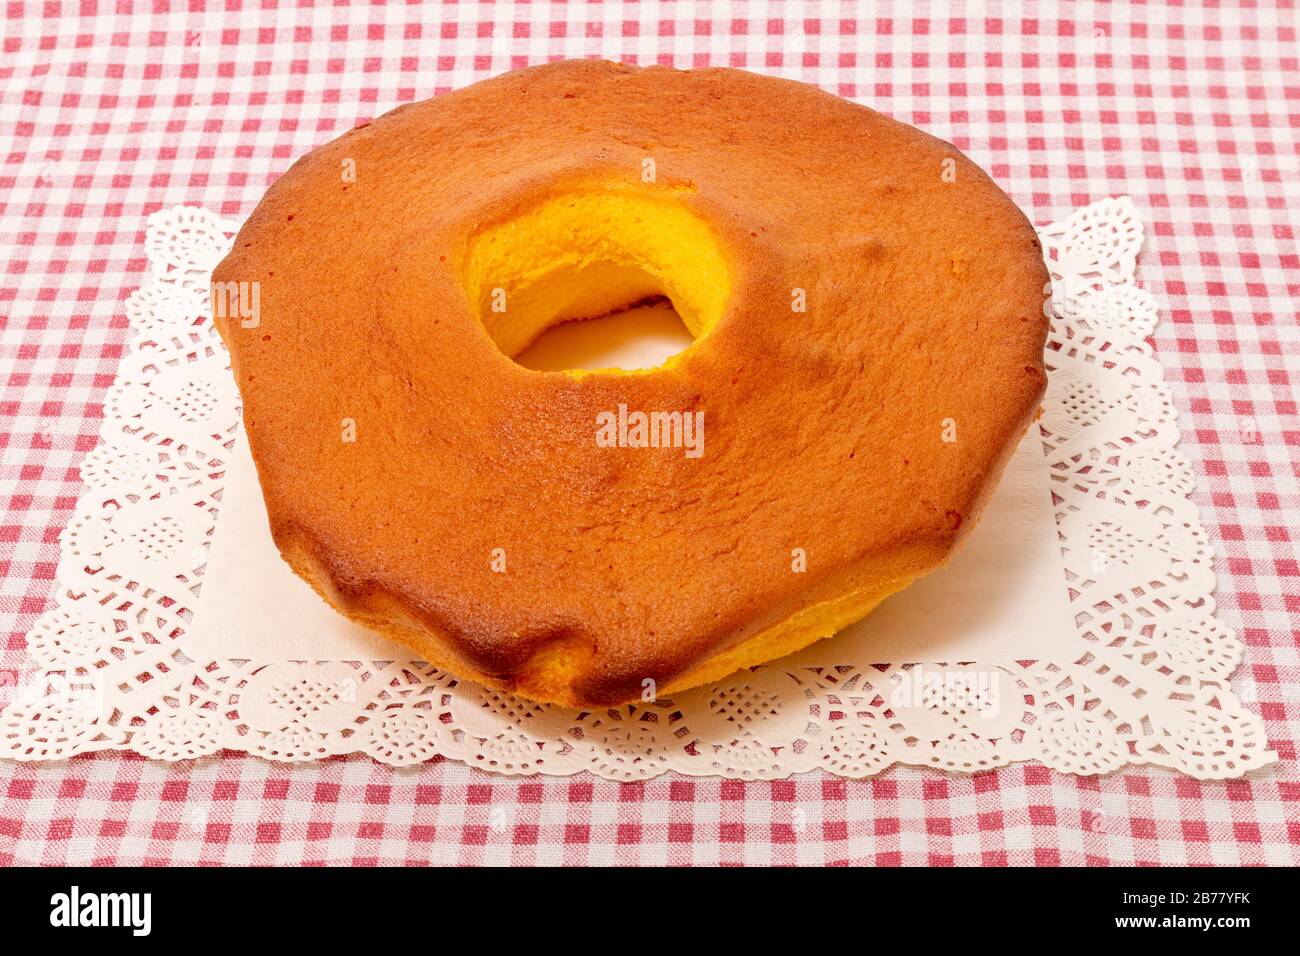 Pao De Lo De Ovar Typical Cake Of Portugal On A Red Table Cloth Stock Photo Alamy